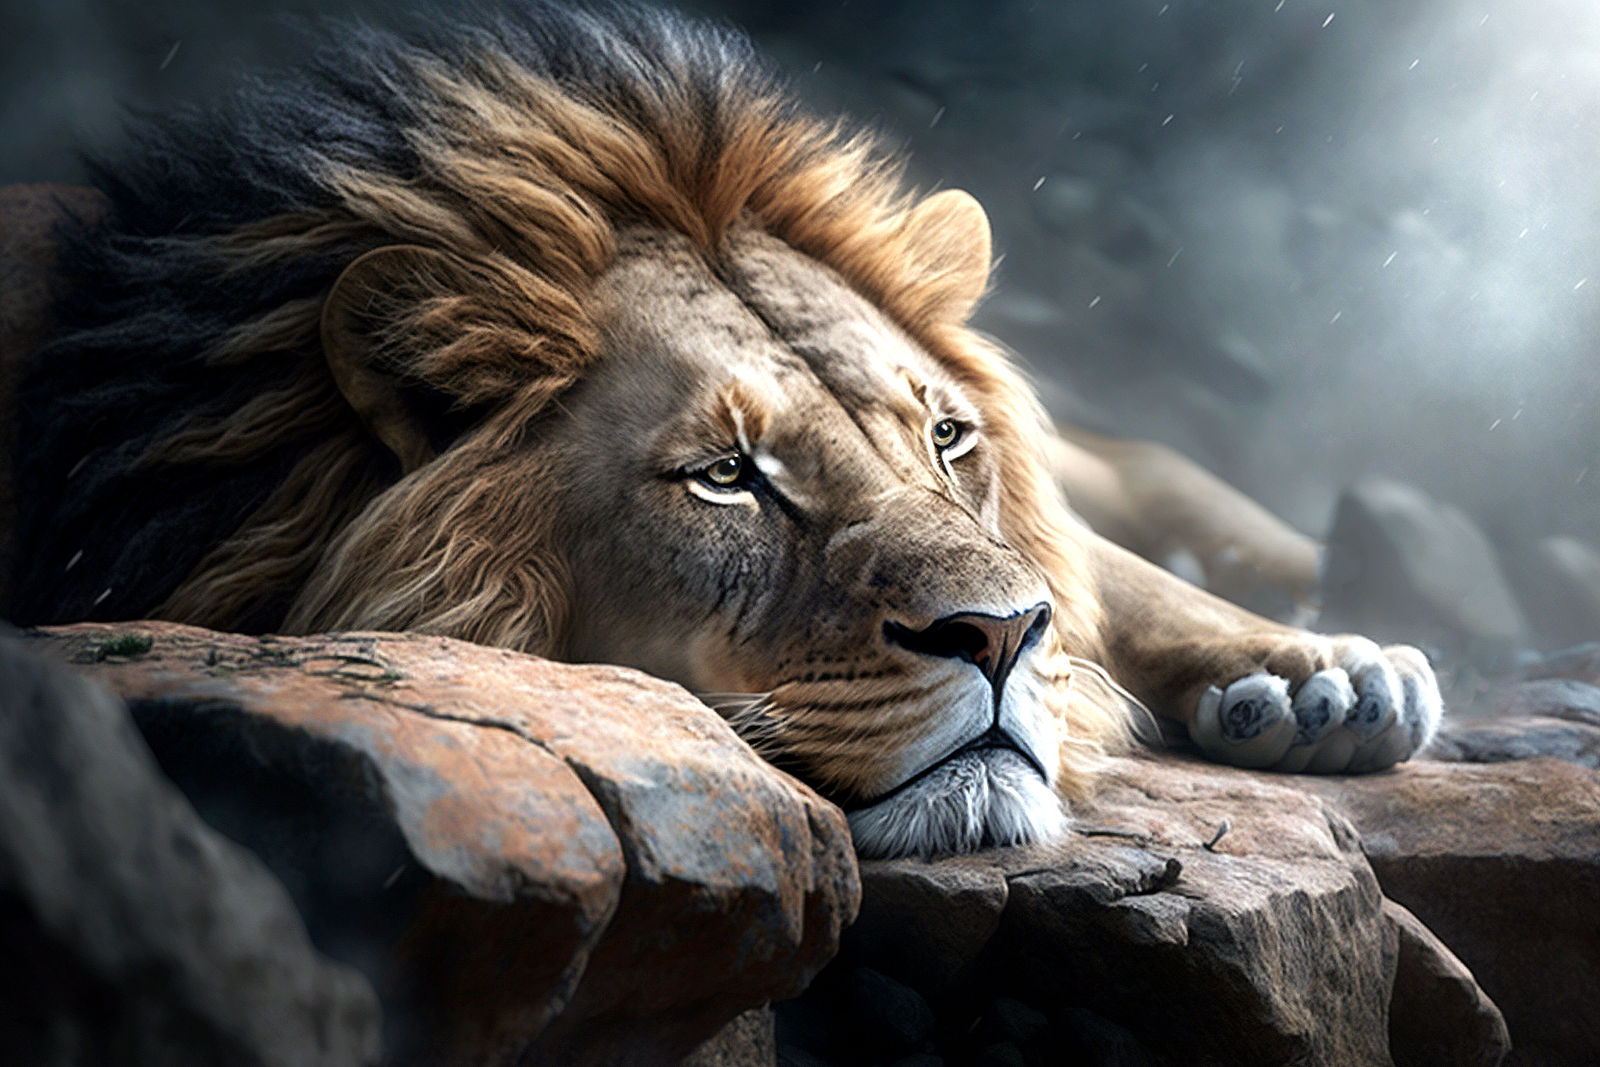 Lion Thinking about Life by JayNL on DeviantArt